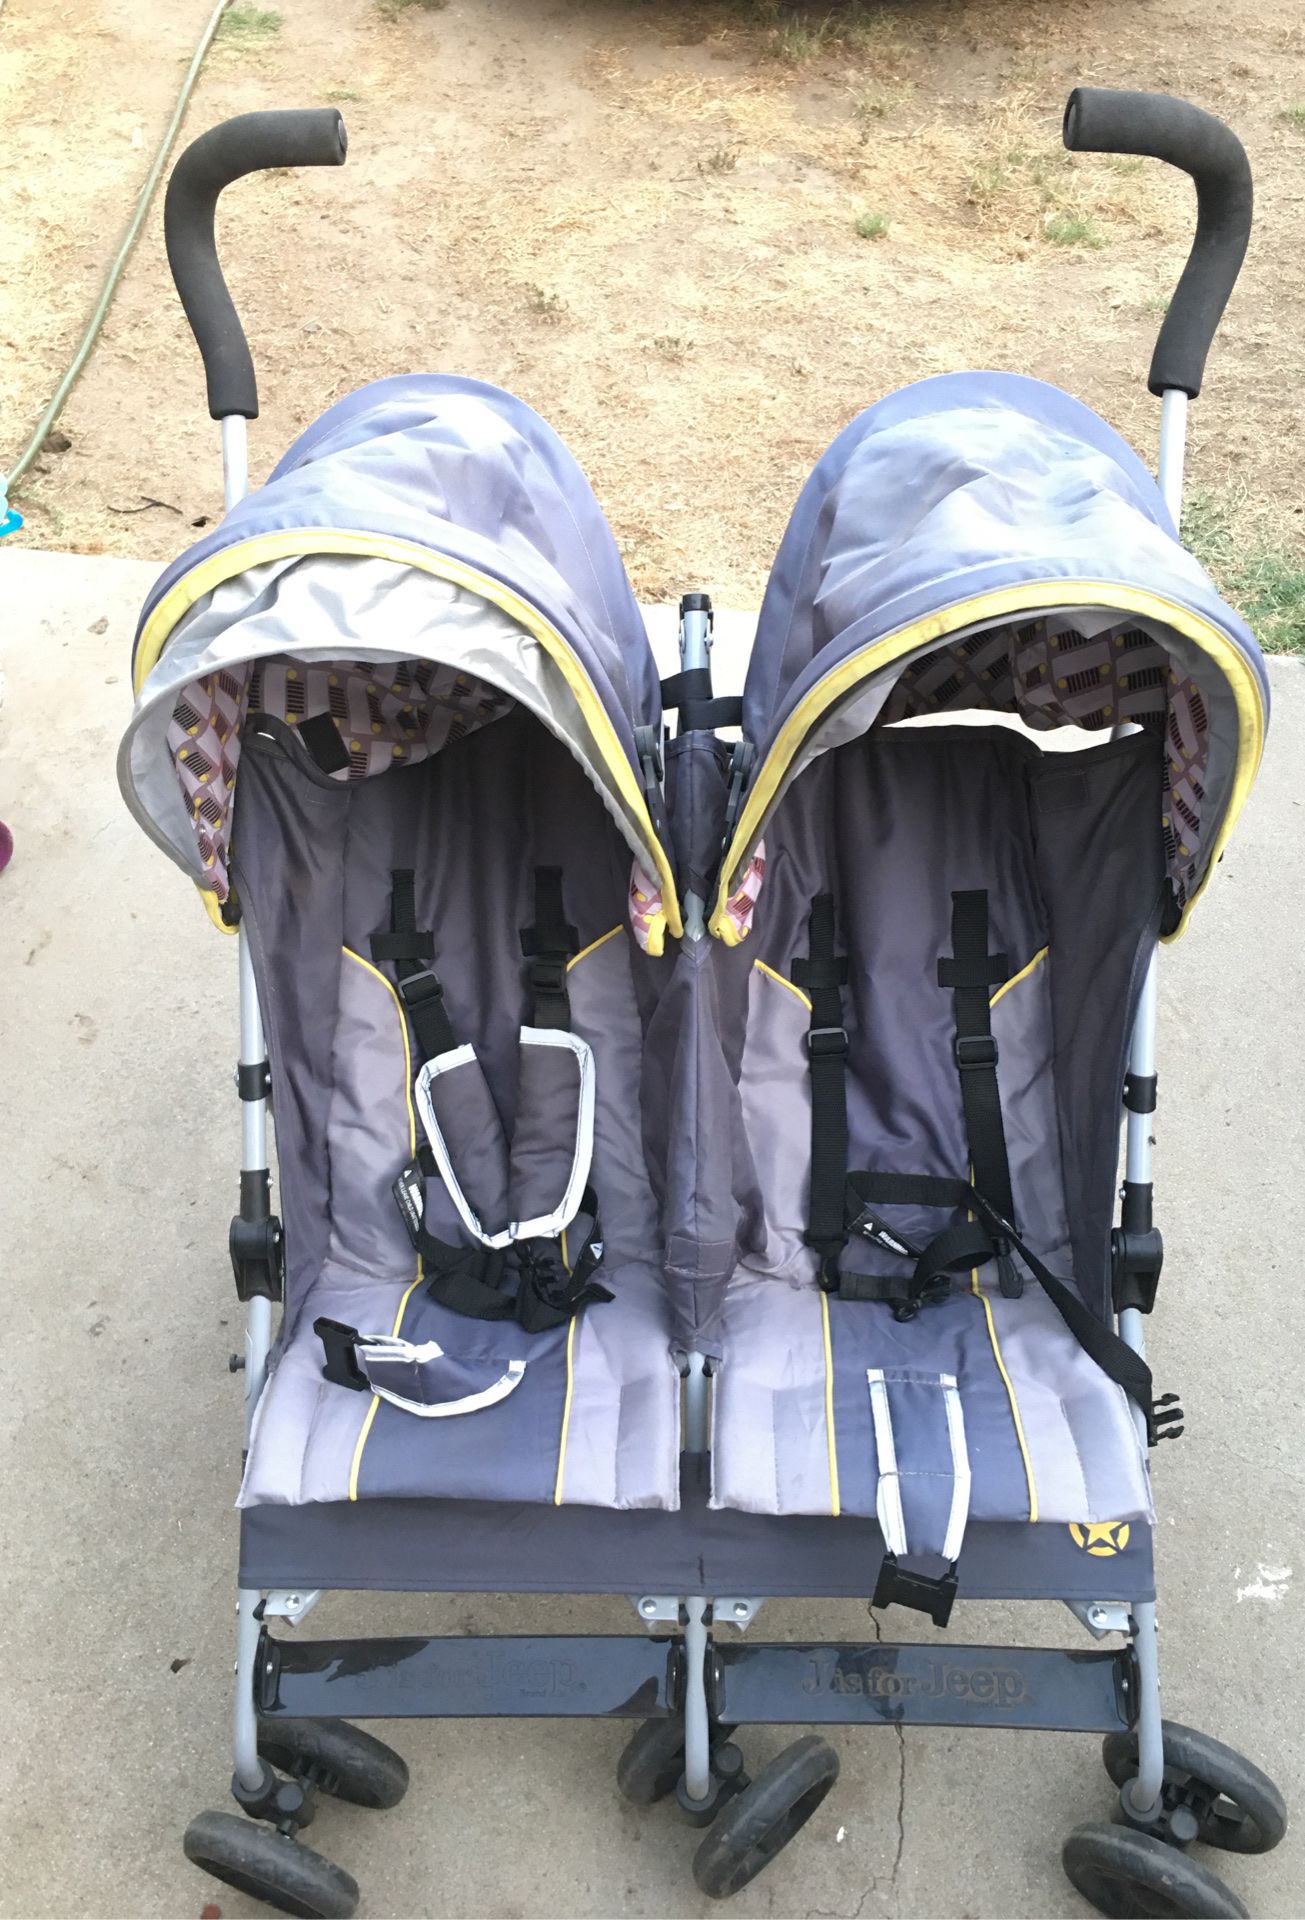 Jeep, double stroller